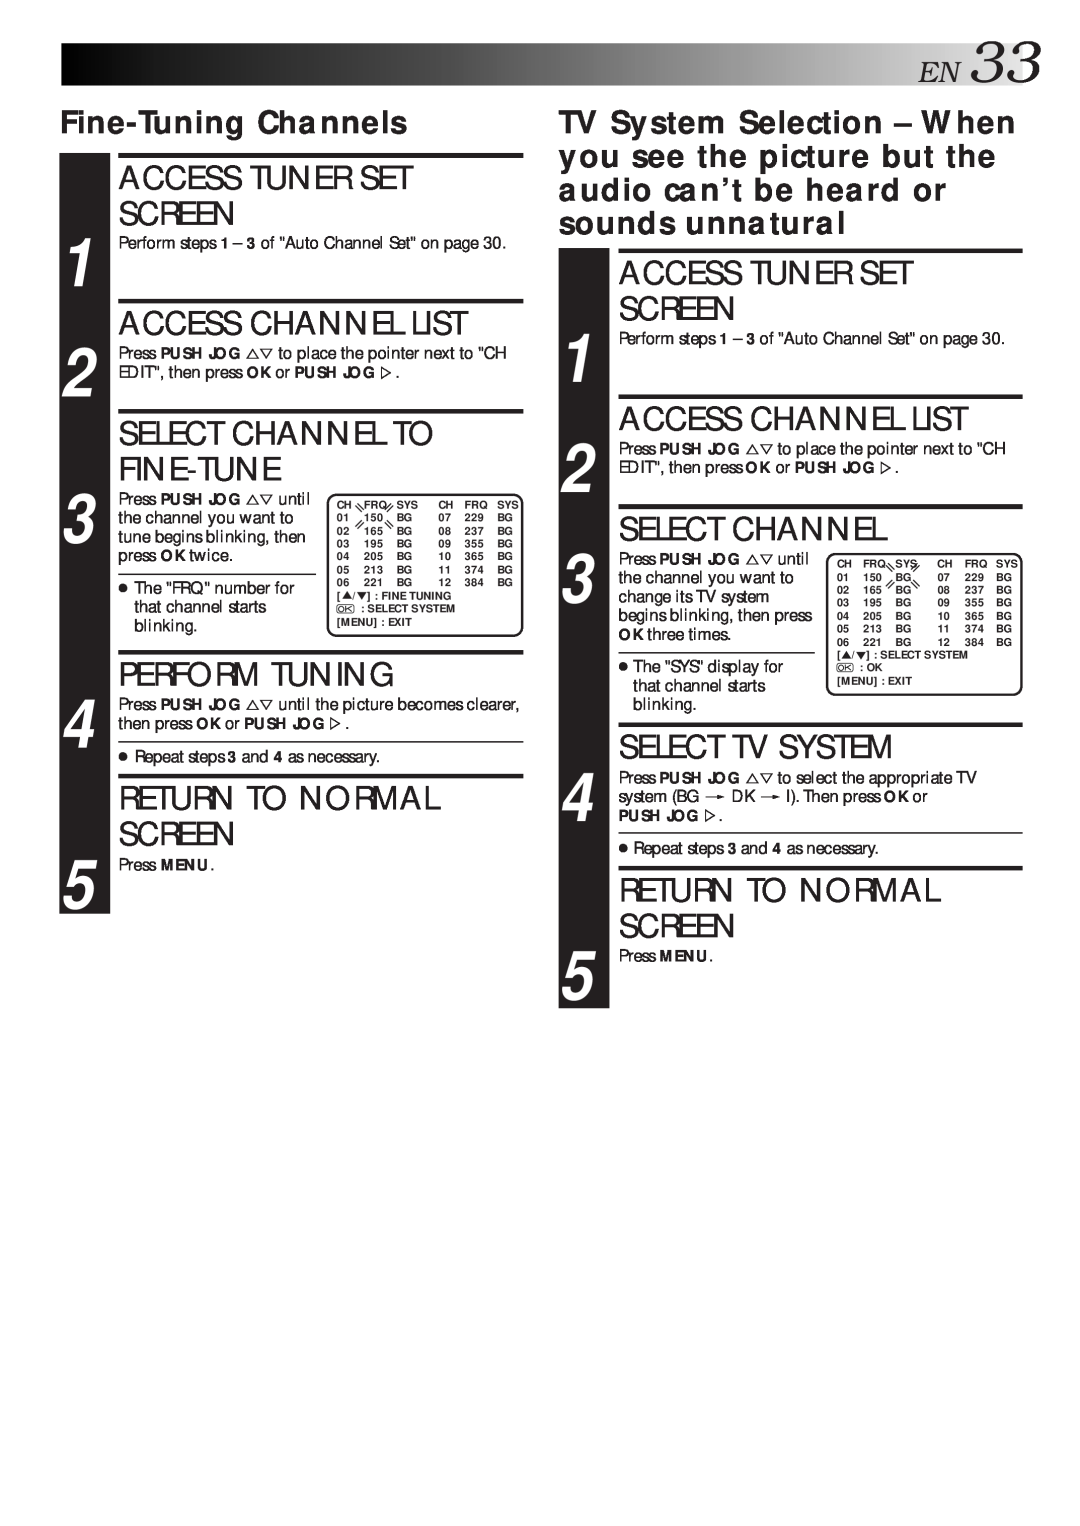 JVC HR-J461MS EN33, Fine-Tune, Fine-Tuning Channels, Select Channel To, Perform Tuning, Screen, Access Channel List 